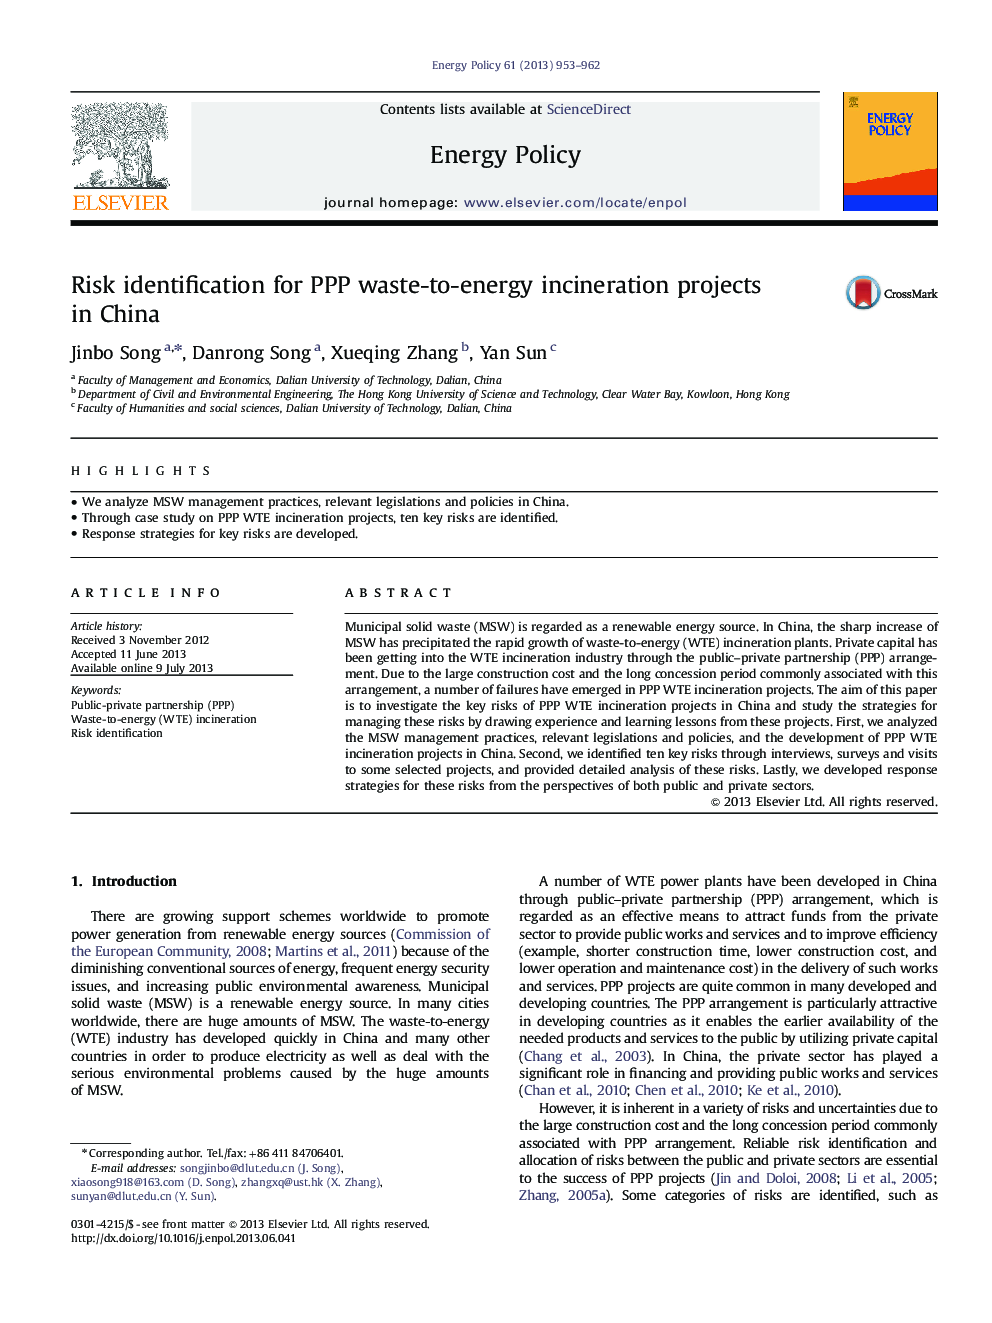 Risk identification for PPP waste-to-energy incineration projects in China